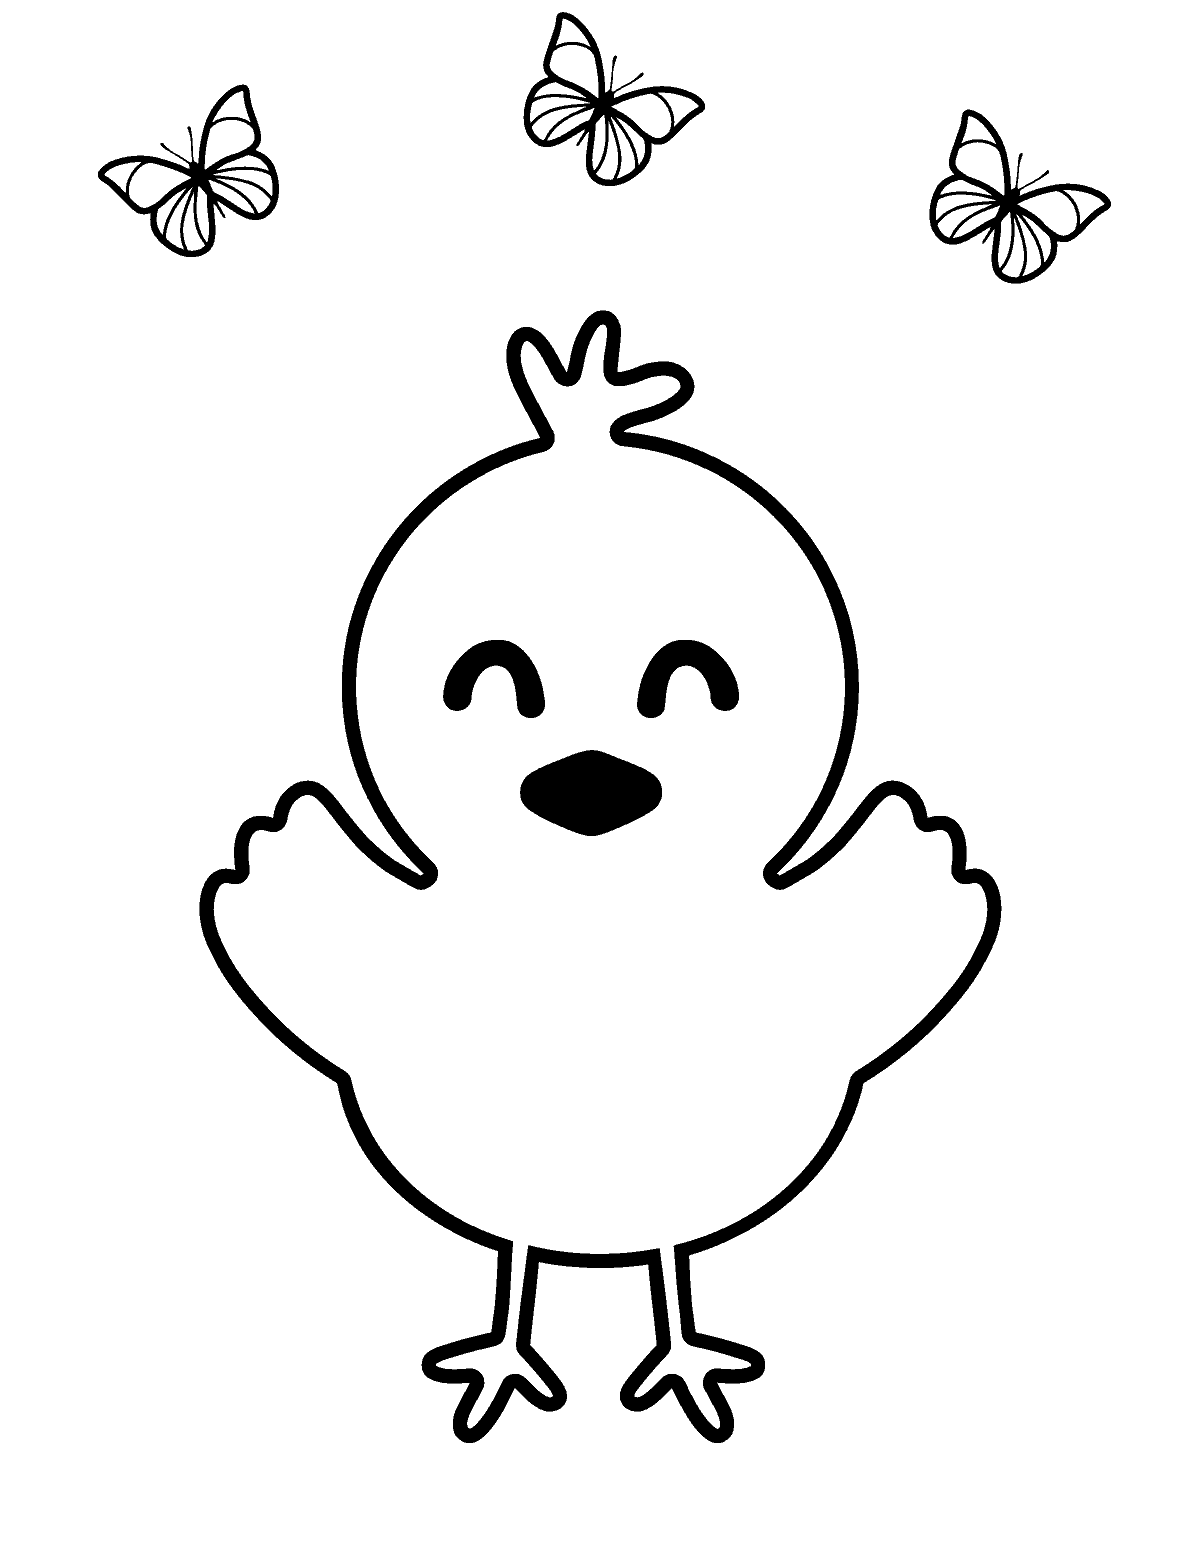 Cute Chick with Butterflies Coloring Page